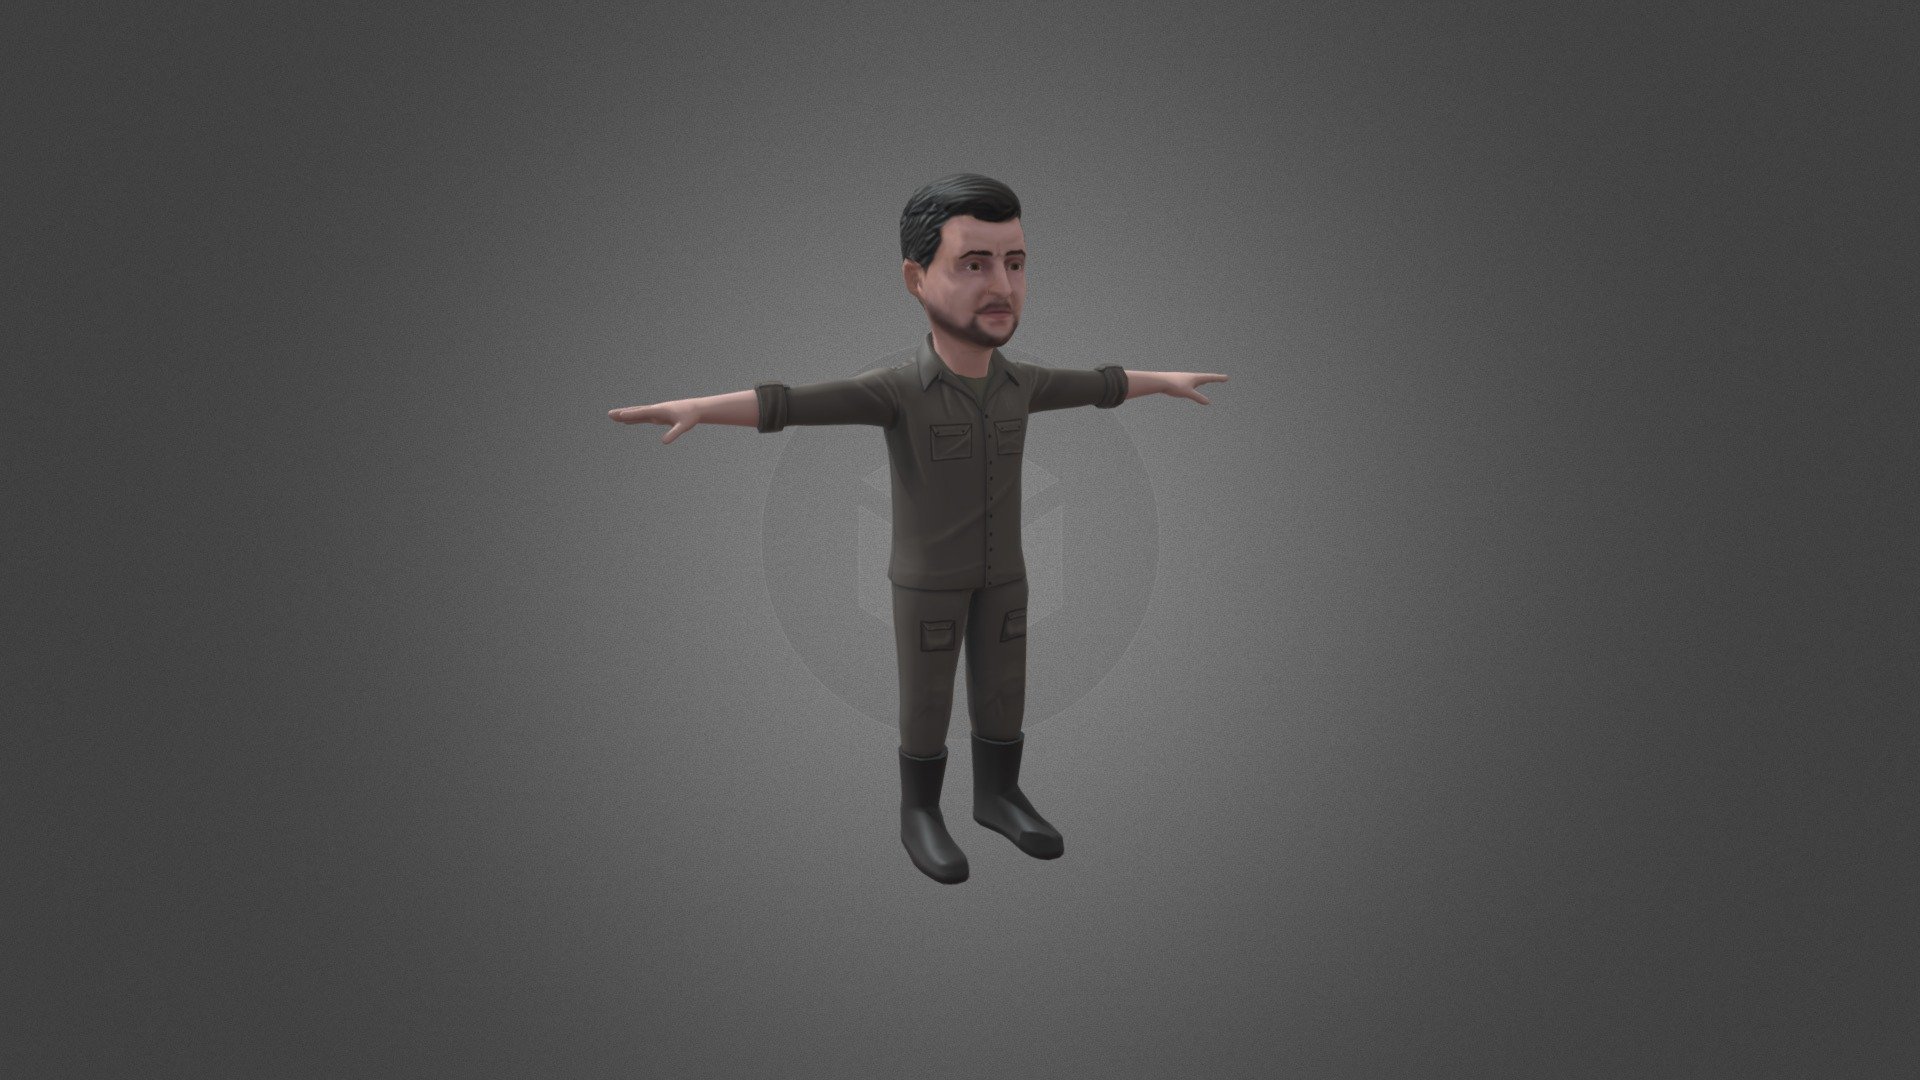 Low poly 3D caricature of Zelensky Vladimir. Rig in T-pose is humanoid mecanim ready. Rig contains additional skinned bones that can be used for facial animations.

Textures are RGB 4K in png format. Can be reduced to 1K without significant decrease to quality. Color map and normal map are included. This model can be used in your projects for commercial purpose.

Number of textures - 2

Texture dimensions - 512*512 px

Number of meshes/prefabs - 1

Types of materials and texture maps (e.g., PBR)  - RGB - Vladimir Zelensky - 3D Political Caricature - Buy Royalty Free 3D model by VinAlex 3d model